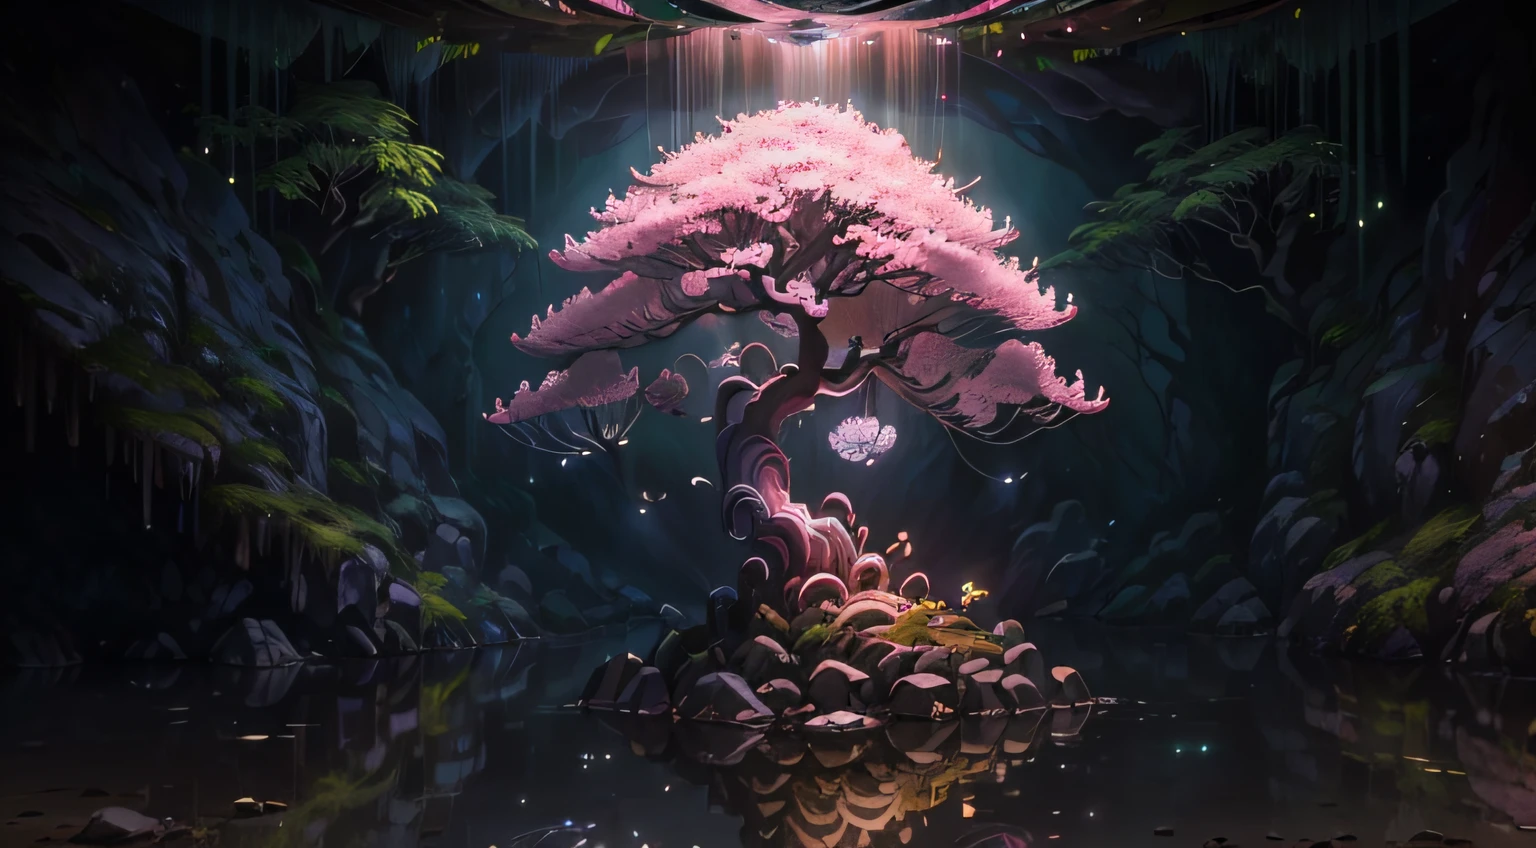 (best quality,4K,8k,highres,master part:1.2),ultra detali,Realistic, HDR, Mystical cherry blossom tree in a cave, illuminated by a burka on the ceiling, magic light, bright flowers of power, swirly vibrant colors, cherry, magical ambiance, luminous flowers, mystical glow, Detailed tree branches, ethereal beauty, enchanting cave, soft sunlight, delicate petals, surreal painting style, dreamlike scenery, Hidden oasis, Supernatural aura, serene and peaceful, fairytale-like, Captivating and charming, Cinematic lighting, bright reflections in the water, magic glow from the hole in the ceiling, mysterious shadows, surreal and magical environment, glowing with magic, pure tree, Cinema lighting, focus on the illuminated tree, flowers shining pink